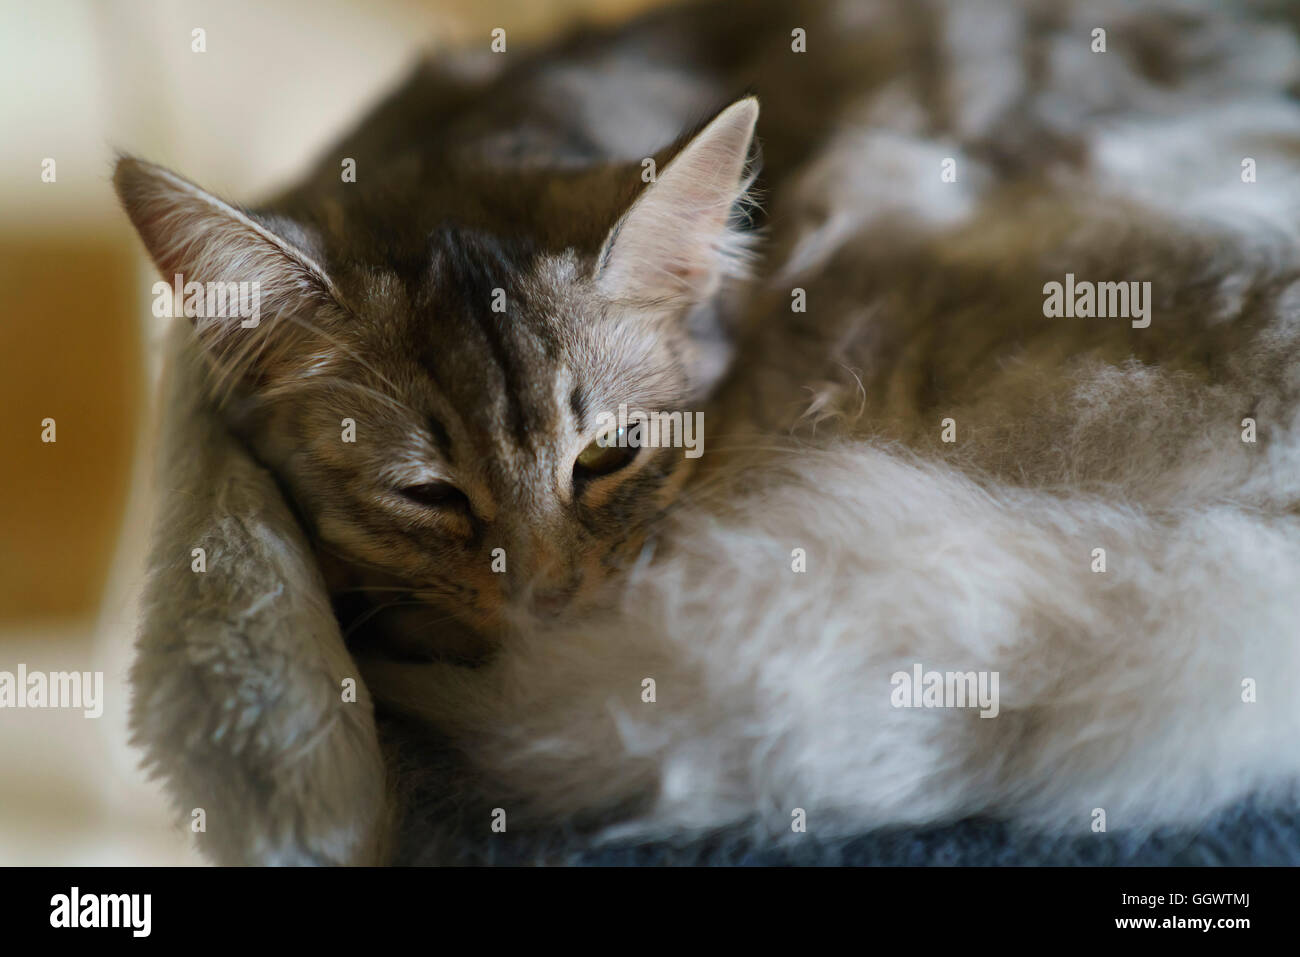 Cat nap - sleeping with an eye open. Stock Photo